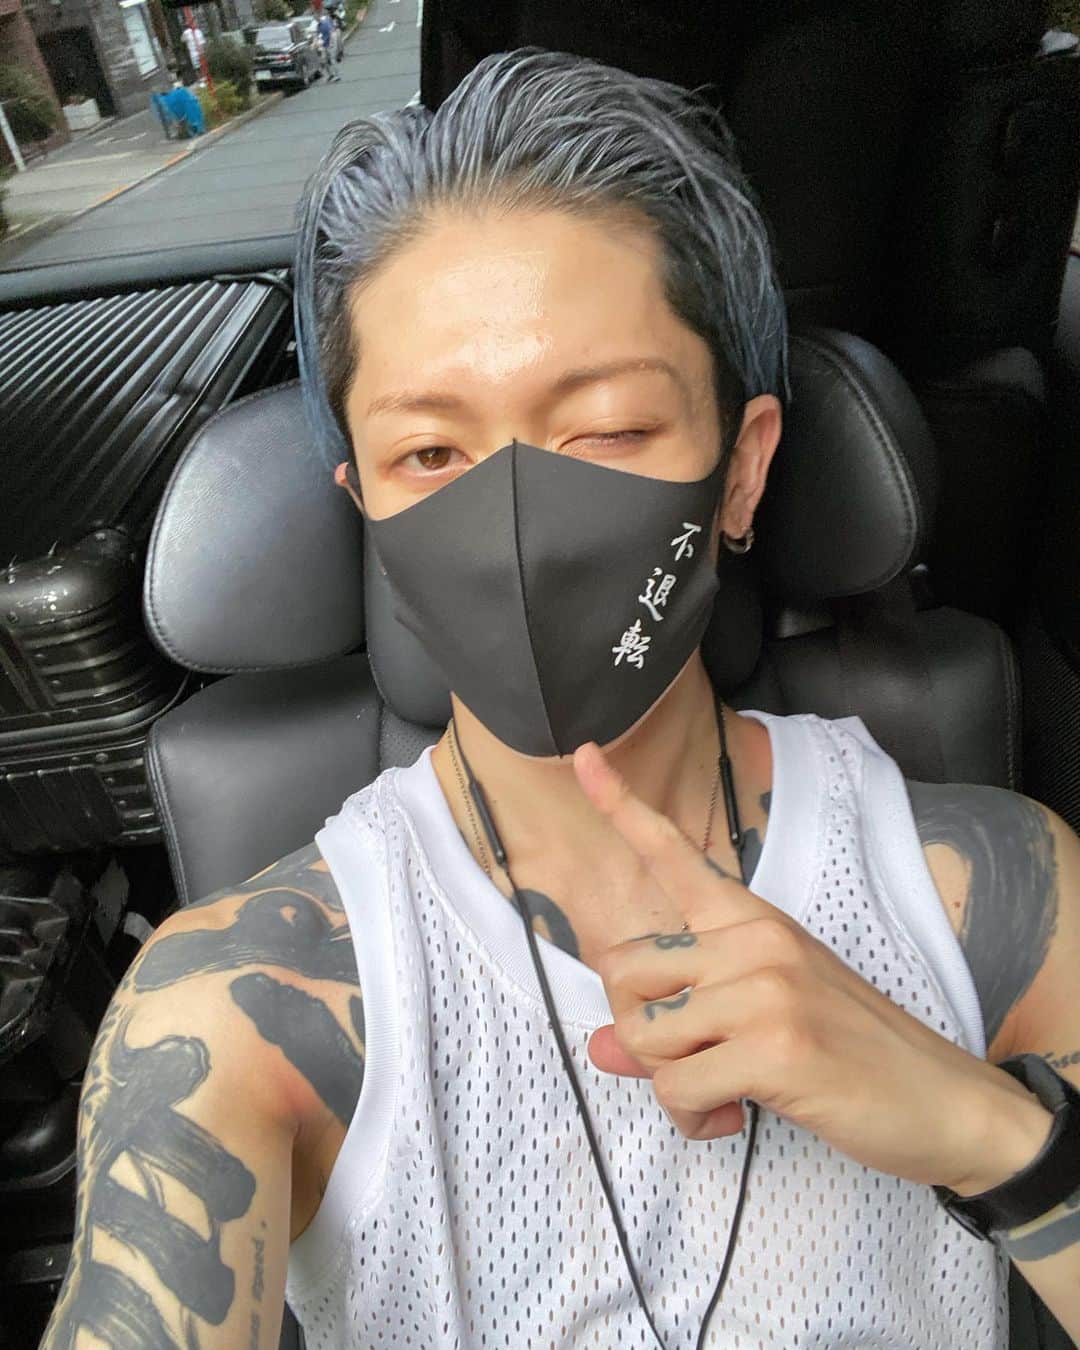 雅-MIYAVI-さんのインスタグラム写真 - (雅-MIYAVI-Instagram)「#WearAMask Challenge started from the director general of @who @drtedros on Twitter.  @filippograndi UN High Commissioner for Refugees accepted the challenge and now passed it to us ambassadors.   Wearing a mask is not only to protect yourself but also the way you show your respect to other people around you and the way you show that you care of other people.   I nominate a person who I respect and who is the best to spread “good” words in the whole world the one and only @samuelljackson 🙏🏻  Everyone can also post a pic with a mask and this hashtag #WearAMask so that we can show that we care about others again.   Let’s get over this fxxkin virus srsly.   👿👿👿👿  ツイッターではじまった「マスクをつけよう」チャレンジ、WHO のテドロス氏からはじまり、UNICEFチーフのヘンリエッタ氏、そして我らが UNCHR リーダーのフィリッポ高等弁務官から、僕たち親善大使へまわってきました。  マスクをつけるのは、自分を守るということと同時に、周りの人に対してのケアであり、リスペクトを示す行為です。  日本の皆はもう言わなくても、というかコロナの前からつけてると思うけど(笑)  というわけで、僕に知る限り世界で一番説得力のあるサミュエル氏にパスしたいと思います。 @samuelljackson マスクつけろ、マ○ファカ〜！  皆も、#WearAMask をつけて写真を投稿してみてね。改めて、マスクの重要性と周りの人へのリスペクトの再確認のために。  コロナ、早く乗り越えようぜ。マジで。  #不退転」9月18日 17時41分 - miyavi_ishihara